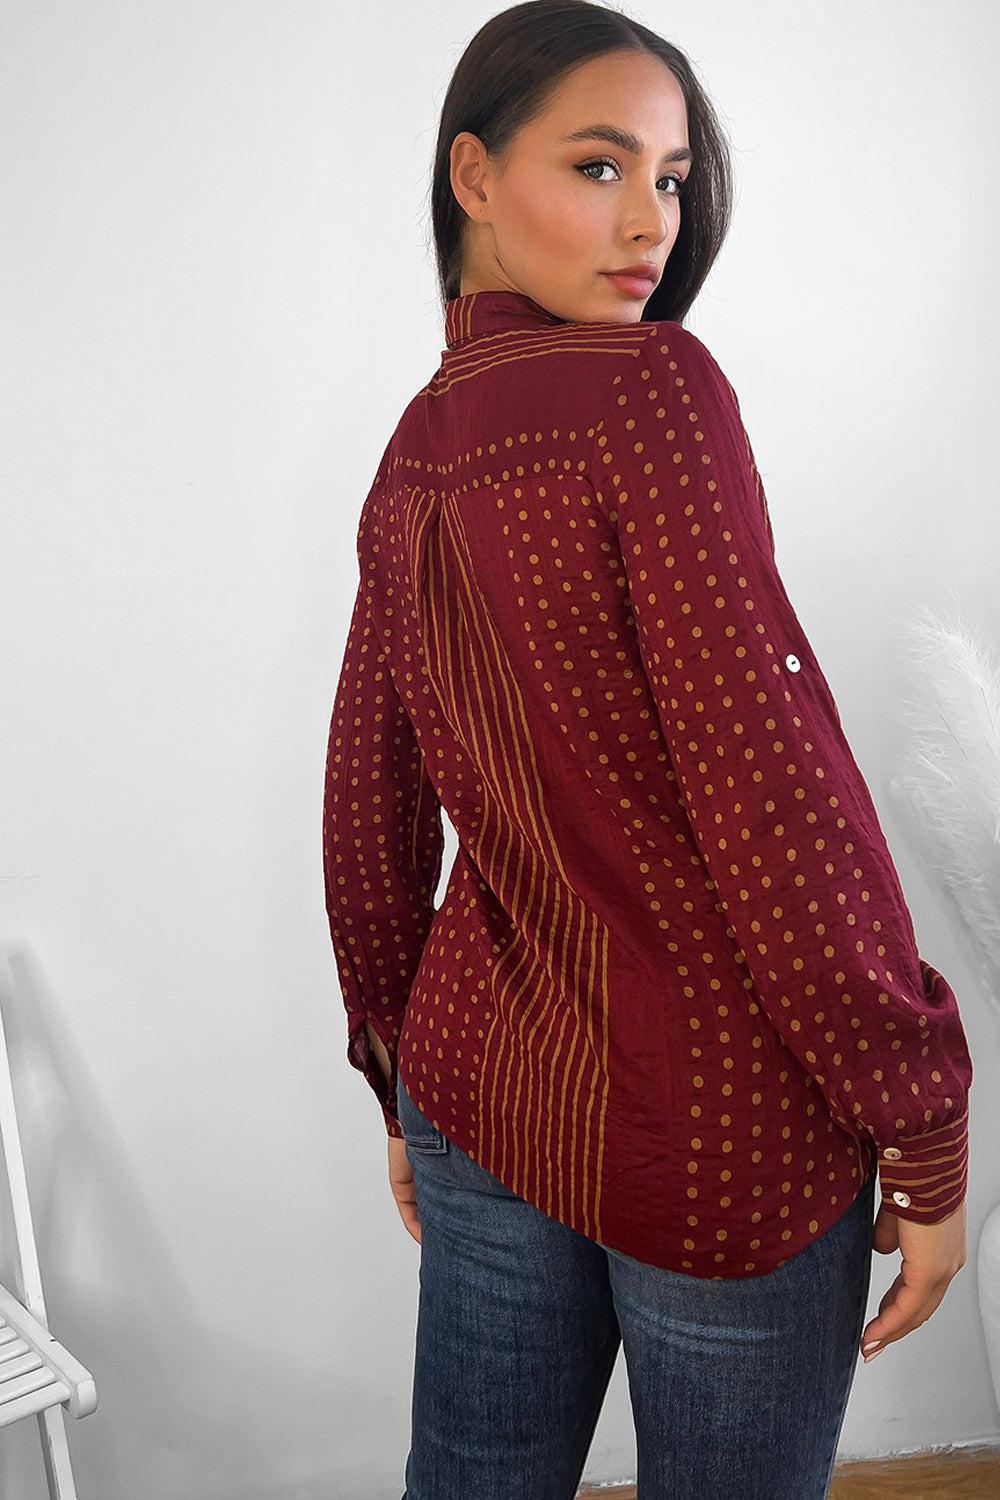 Dark Red In Stripes And Dots Cotton Shirt-SinglePrice